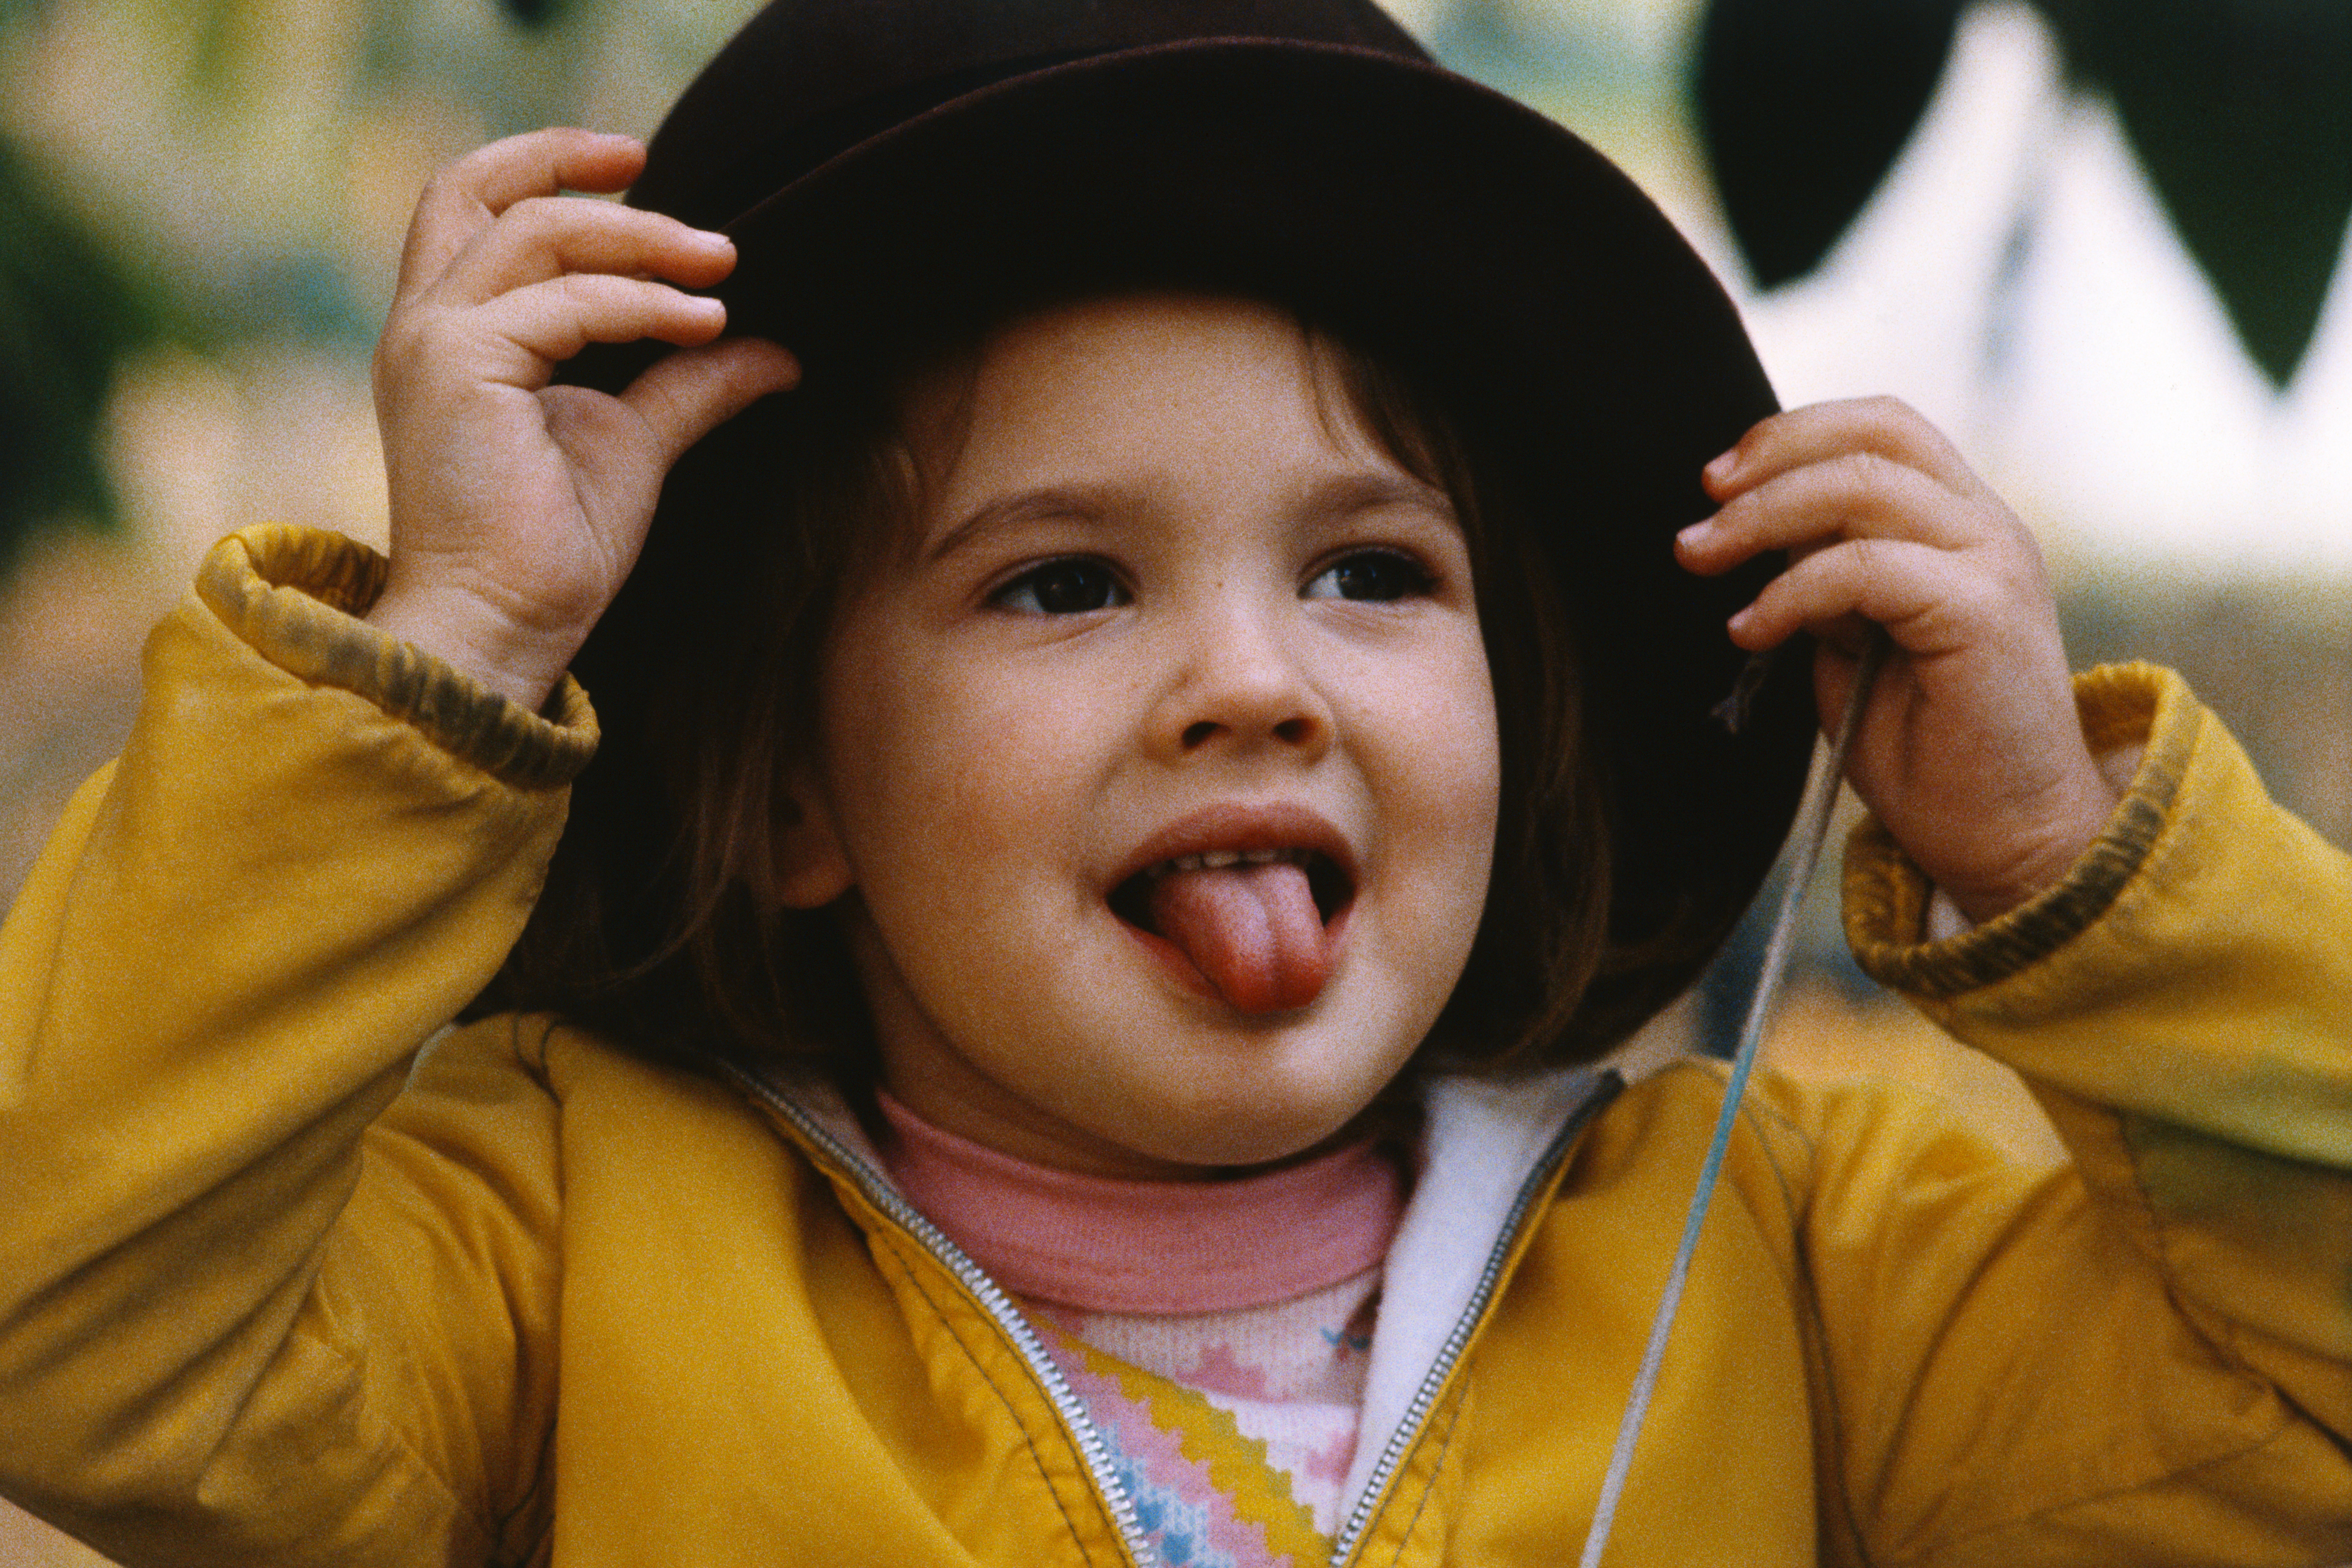 The movie star, 4, imagines she's a grownup as she tried on one of her mother's hats on March 21, 1979. | Source: Getty Images